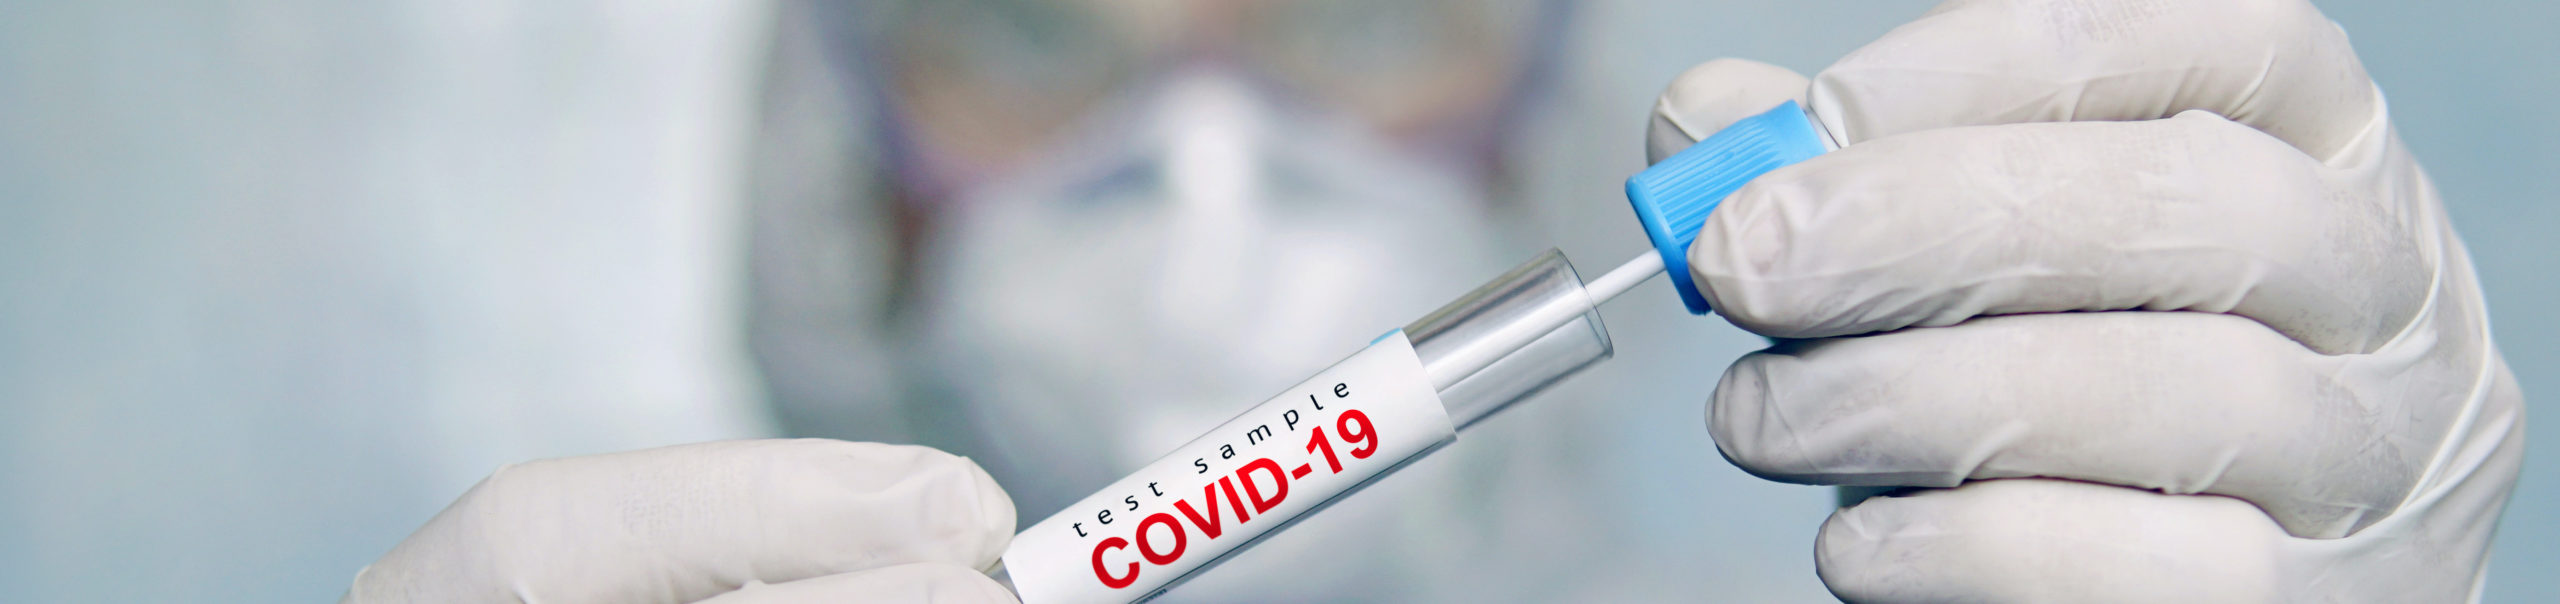 COVID-19 Test Kits for Organizations - Cook County Department of Public Health